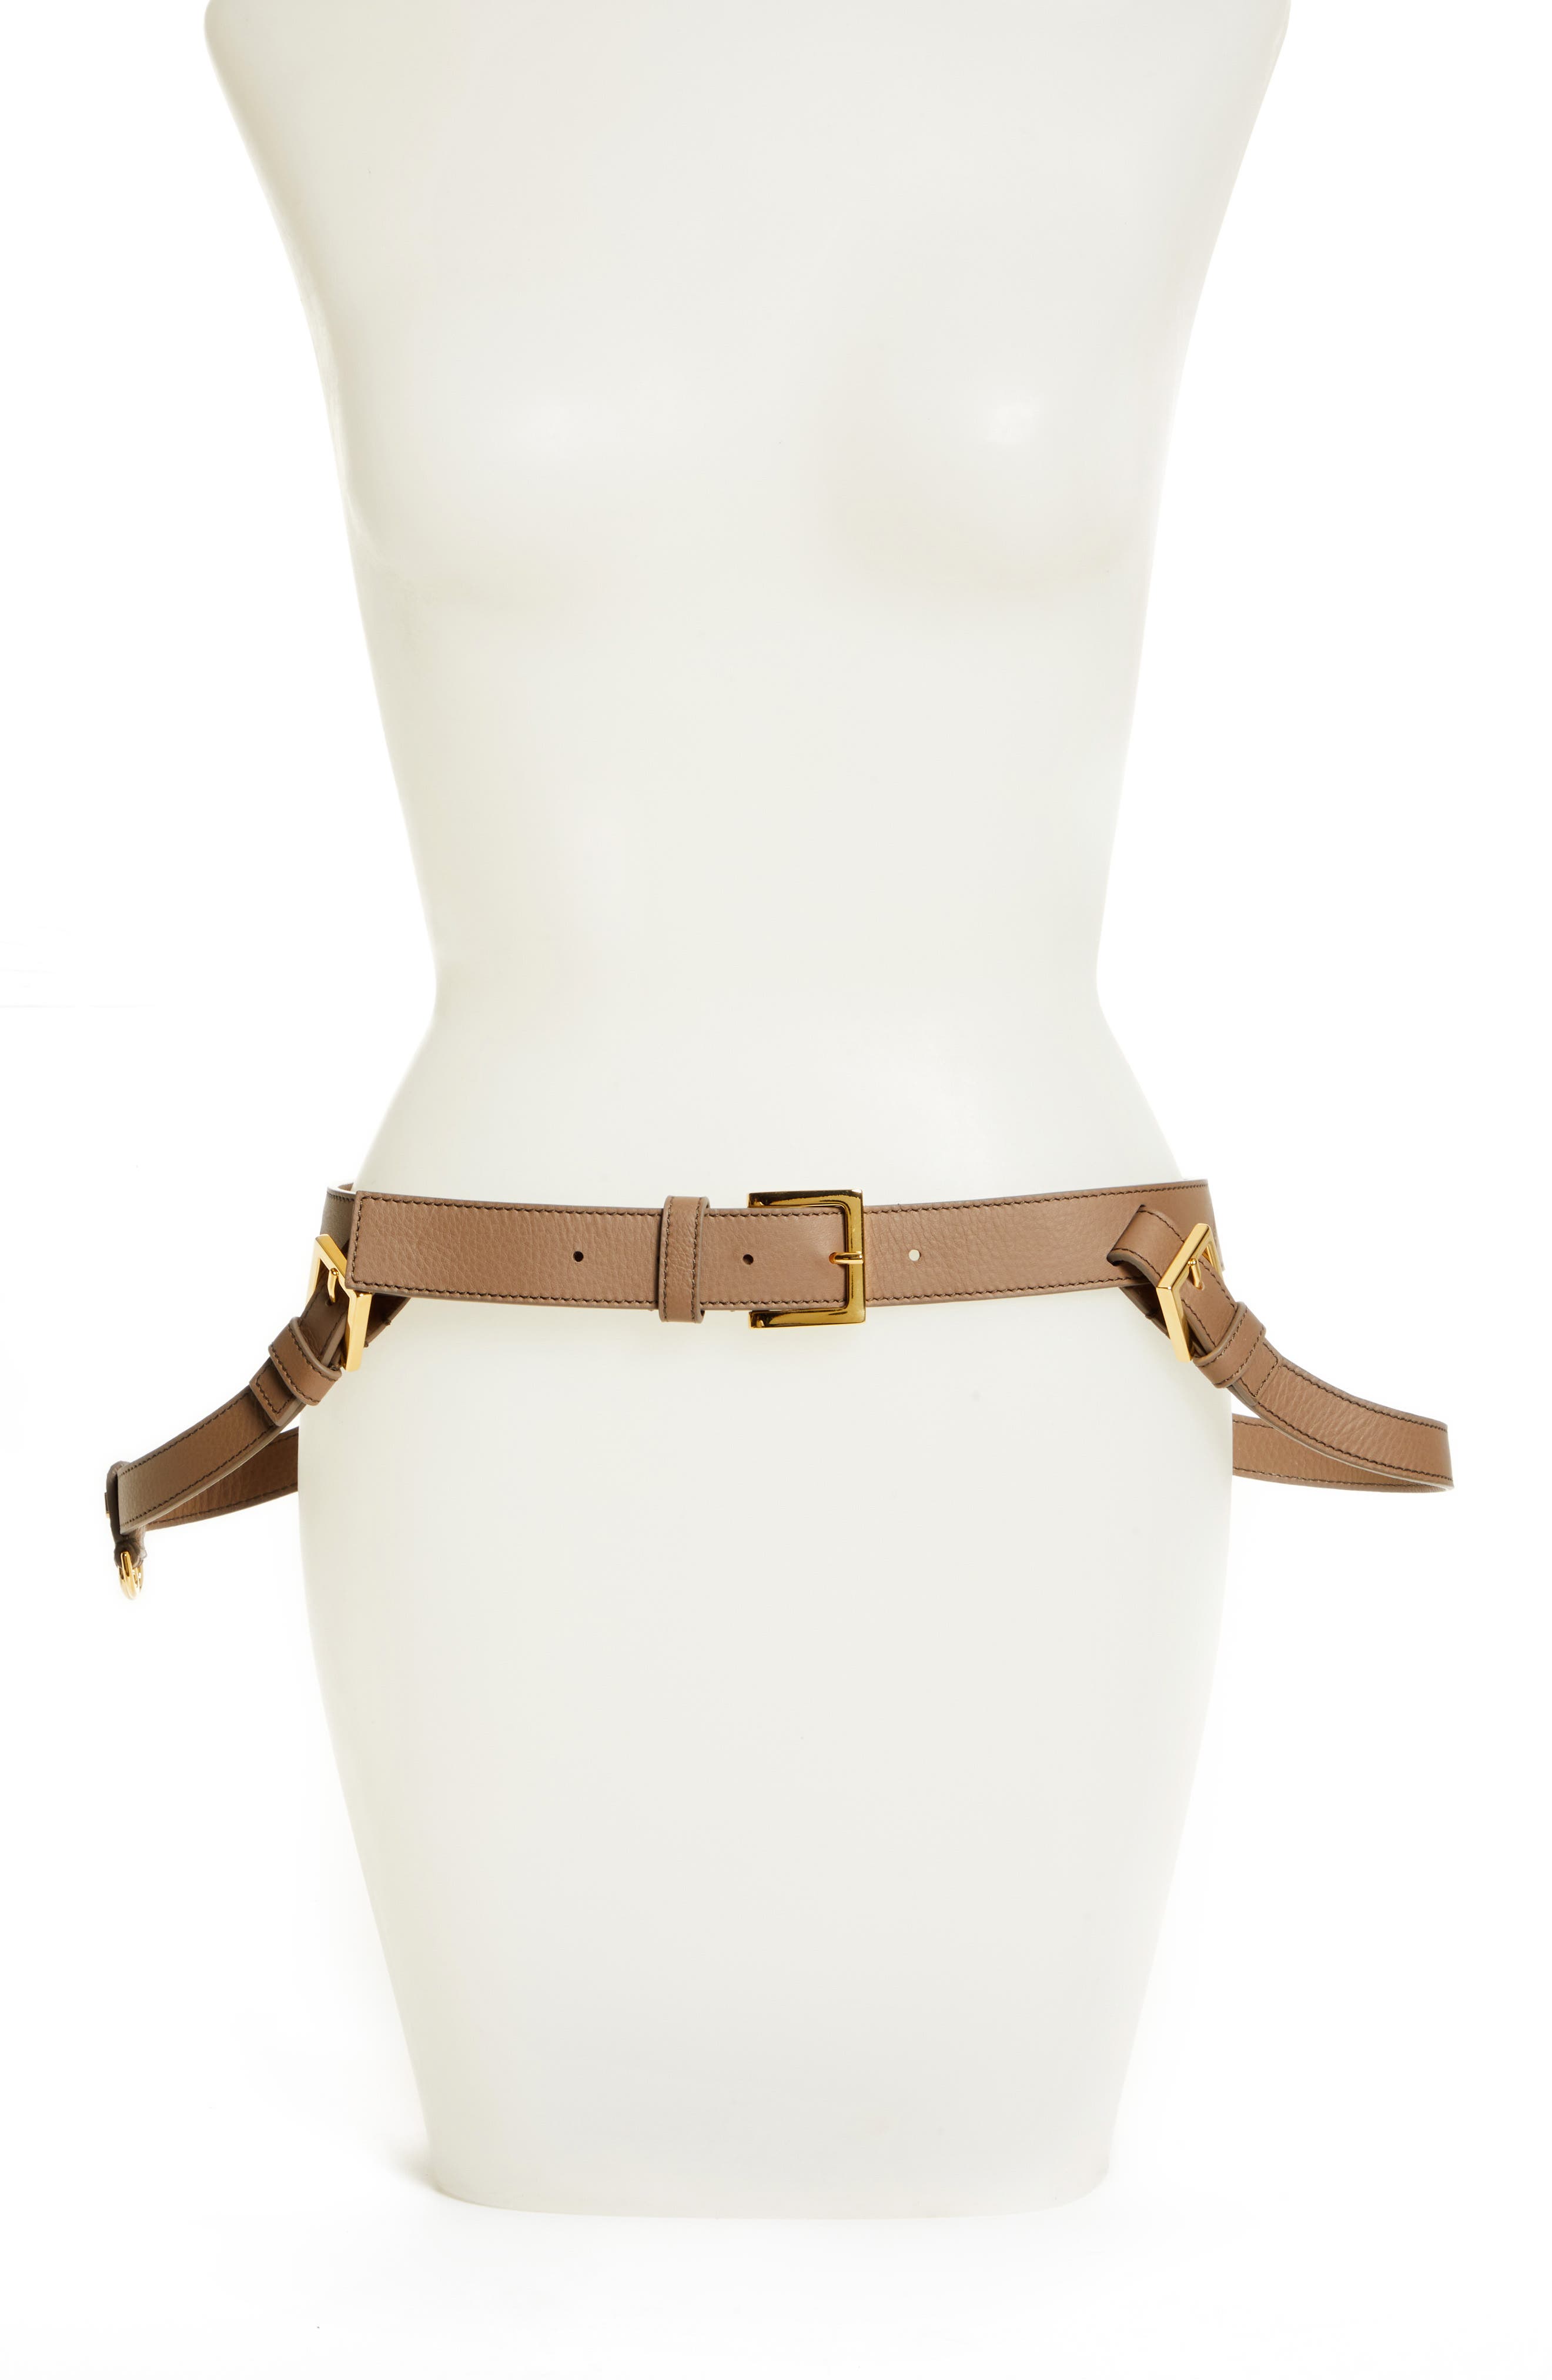 Jacquemus Le Ceinture Baudrier Leather Harness Belt in Light Brown at Nordstrom, Size Large